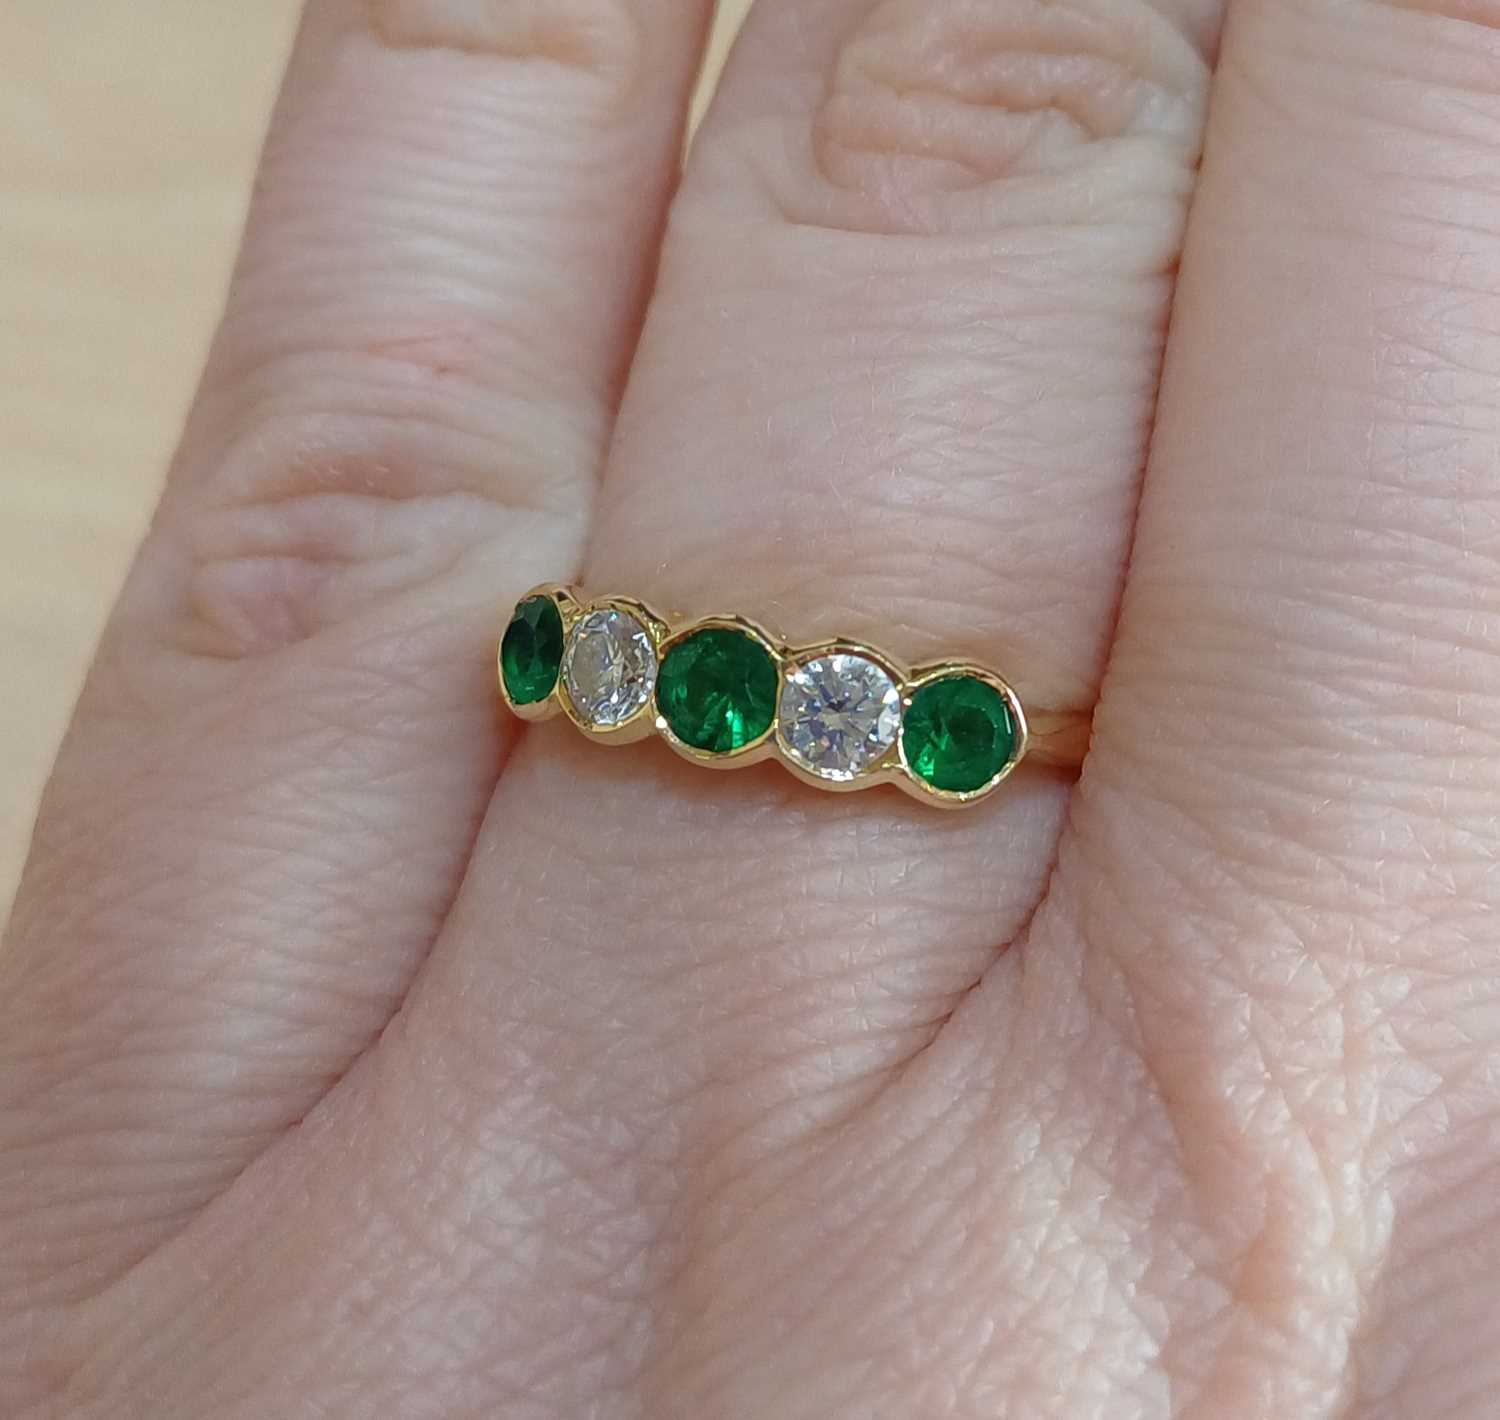 An 18 Carat Gold Emerald and Diamond Five Stone Ring three round cut emeralds alternate with two - Image 2 of 4